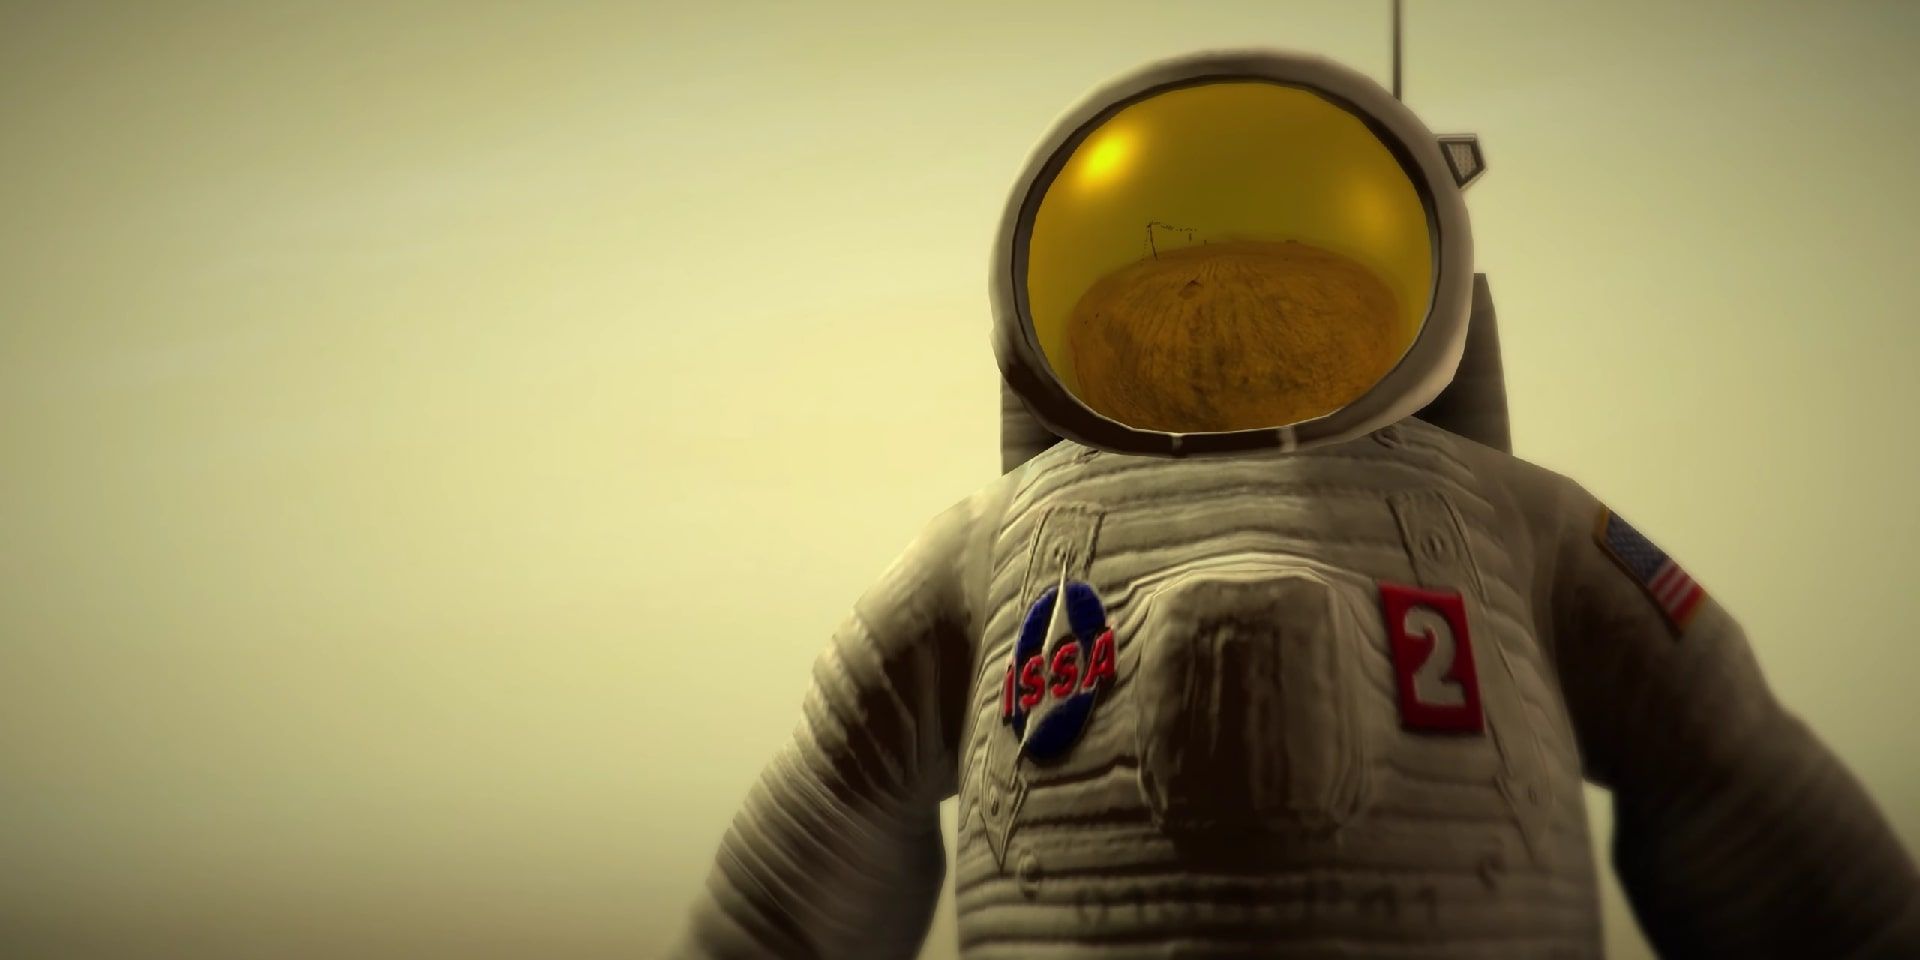 A close-up shot of the gold-visored astronaut from Lifeless Planet during a cutscene, with the reflection of the landscape appearing on his helmet.